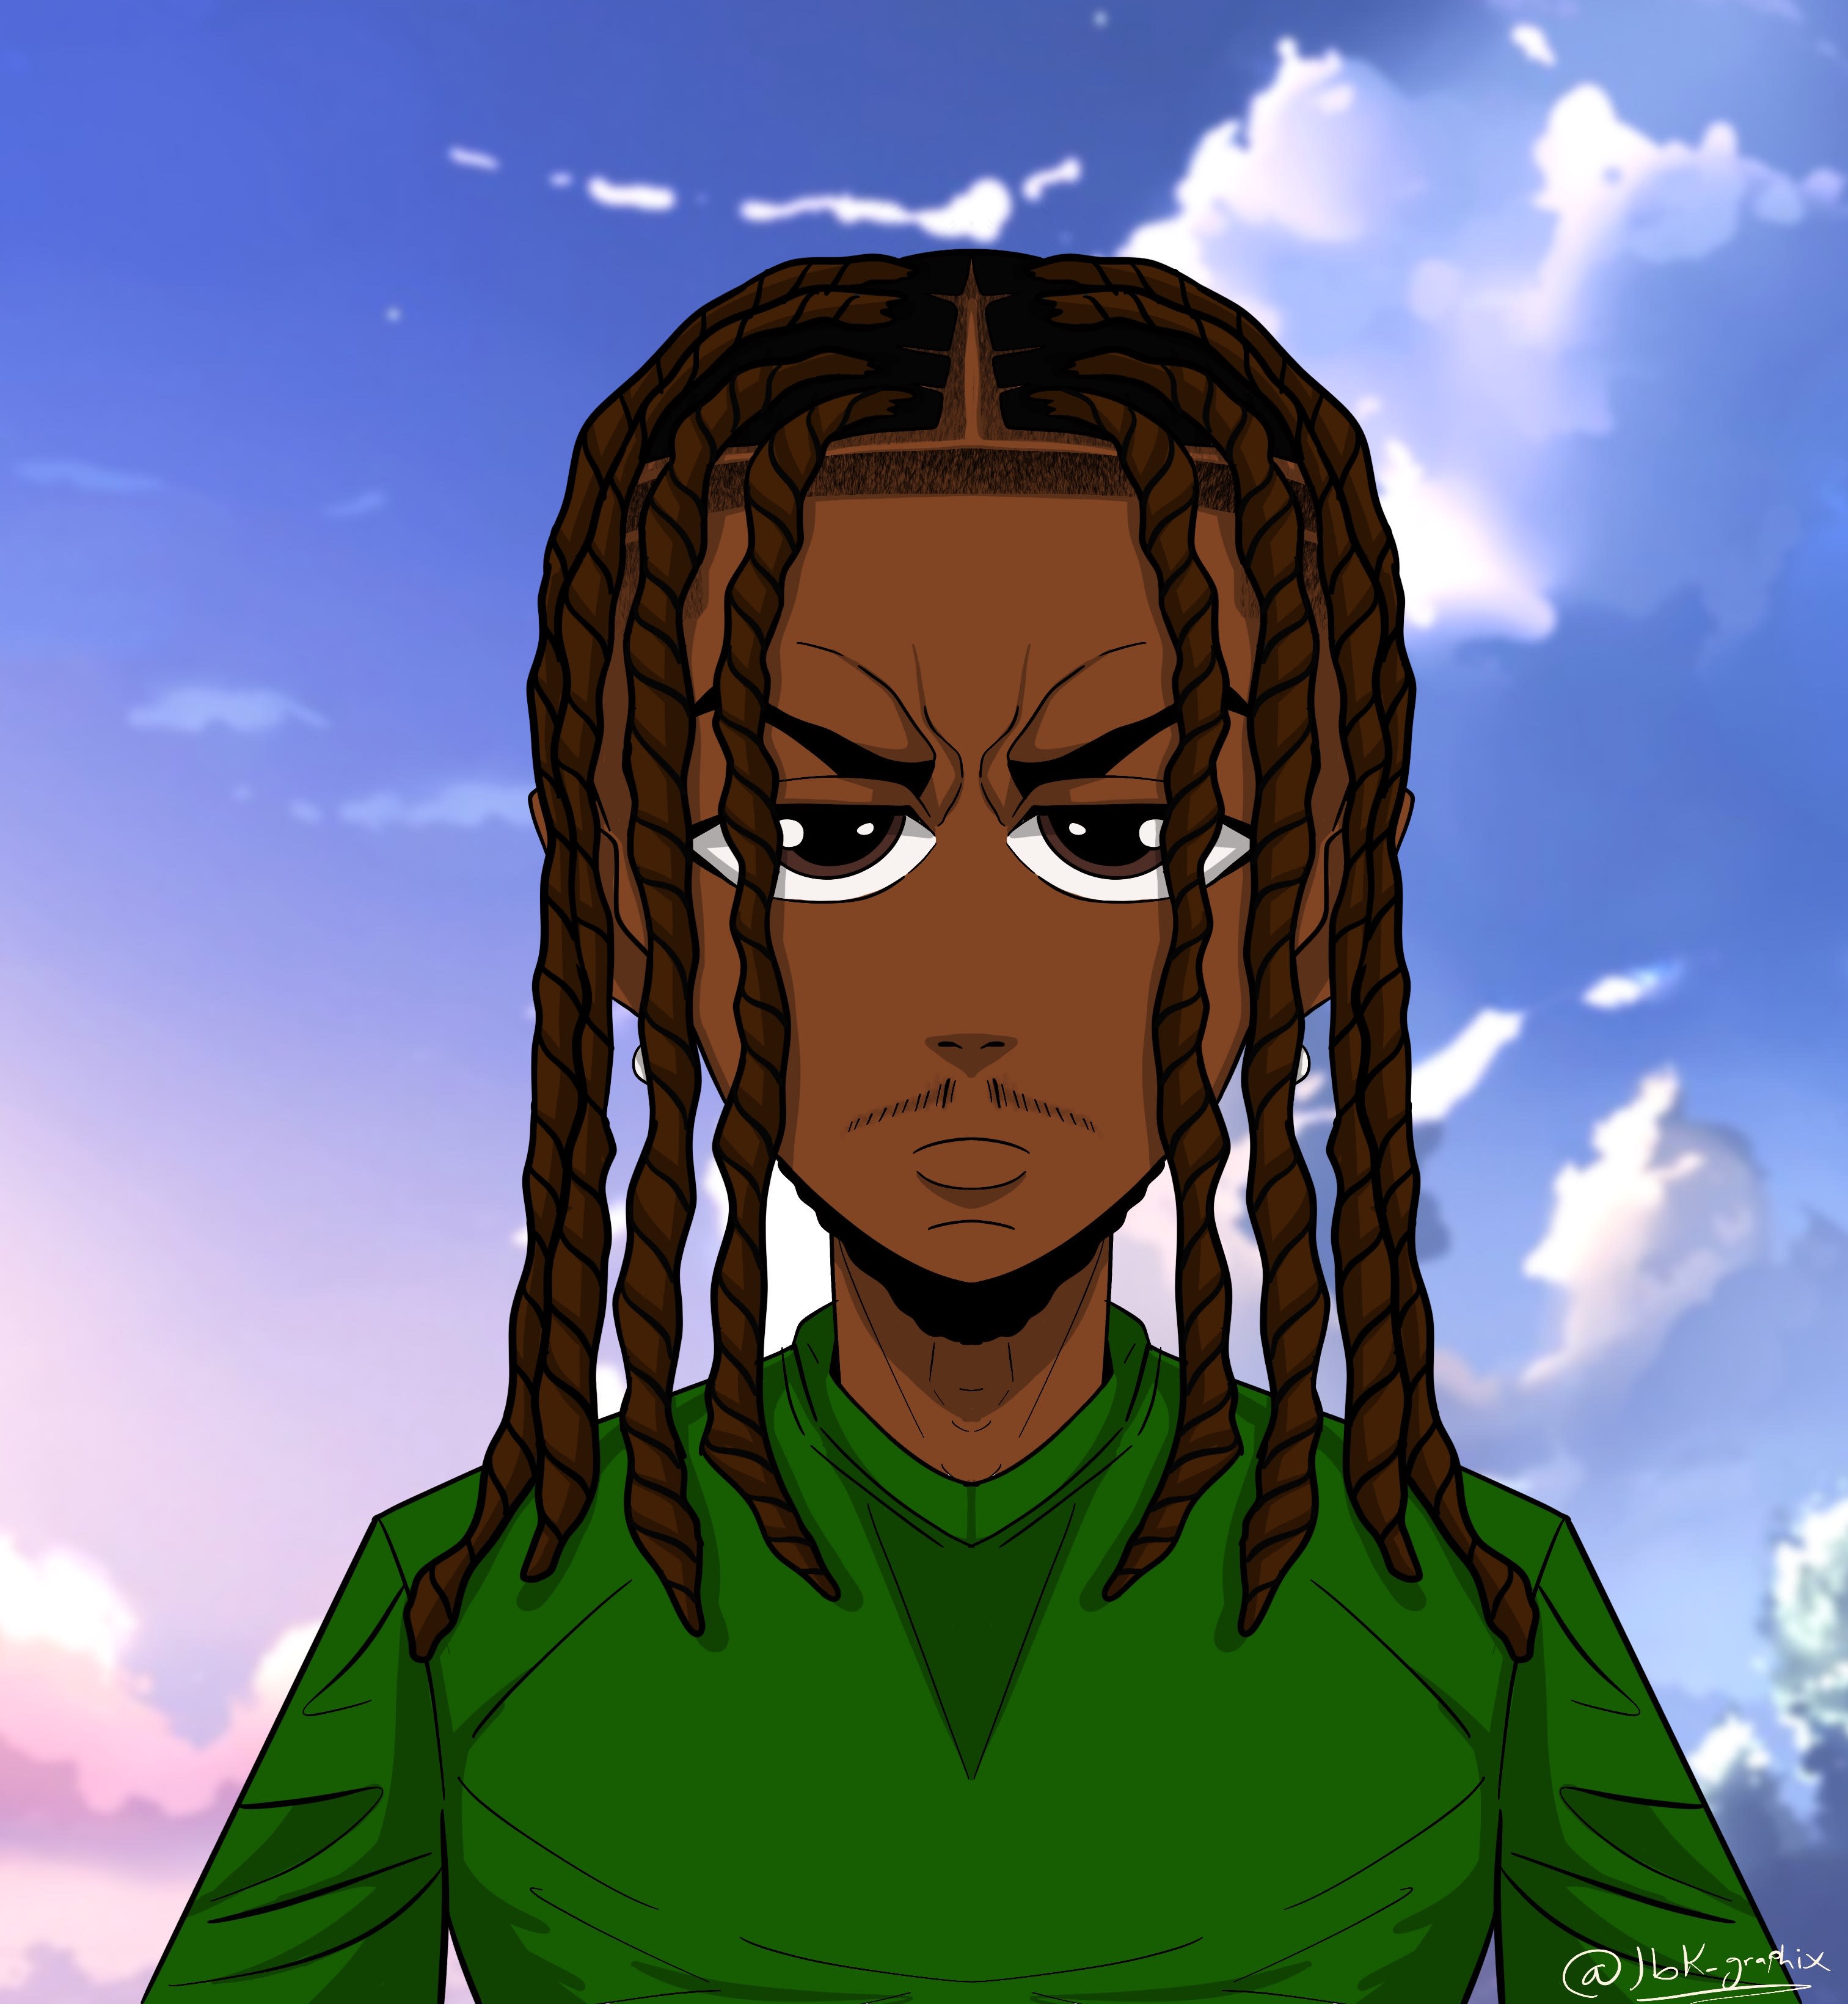 Draw a boondocks cartoon of your picture in 24hours by Ibk_graphix01 |  Fiverr